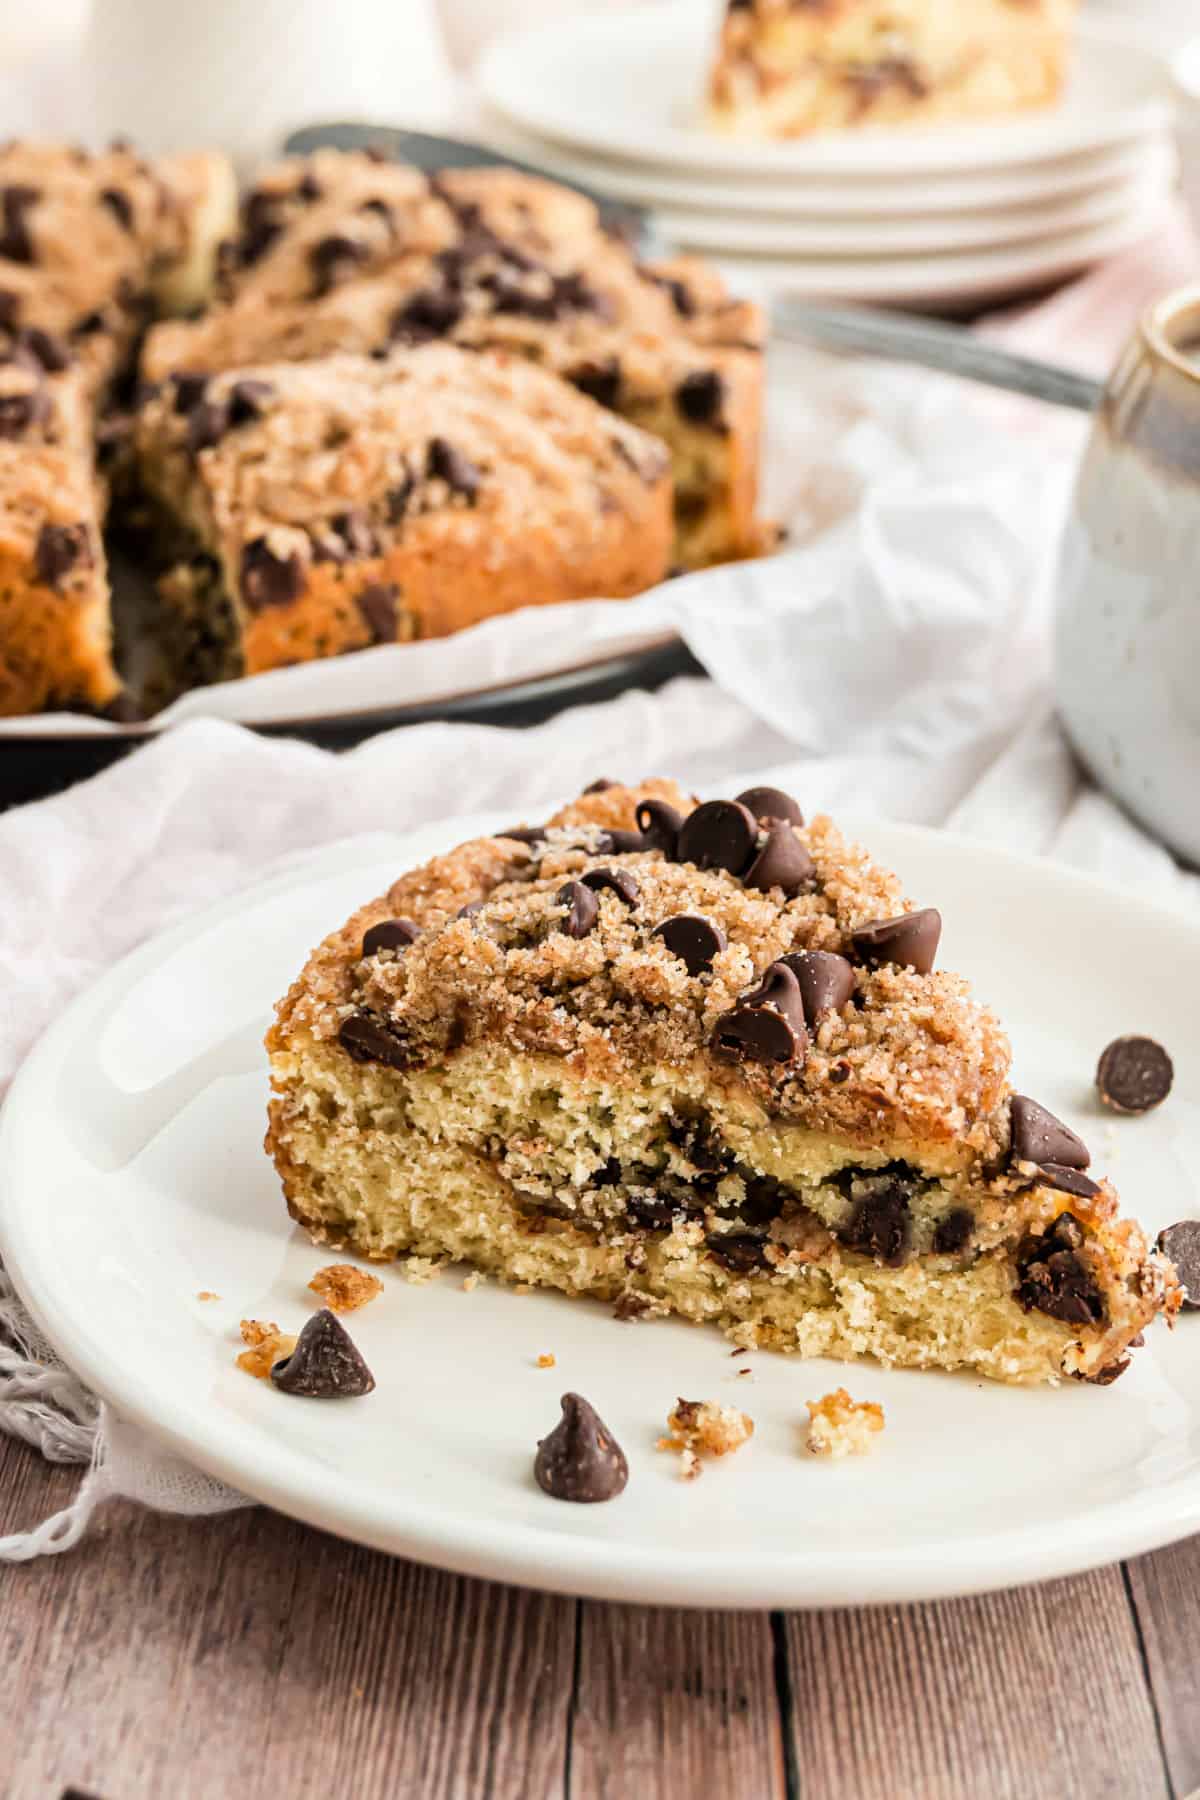 Slice of chocolate chip coffee cake on a white serving plate.